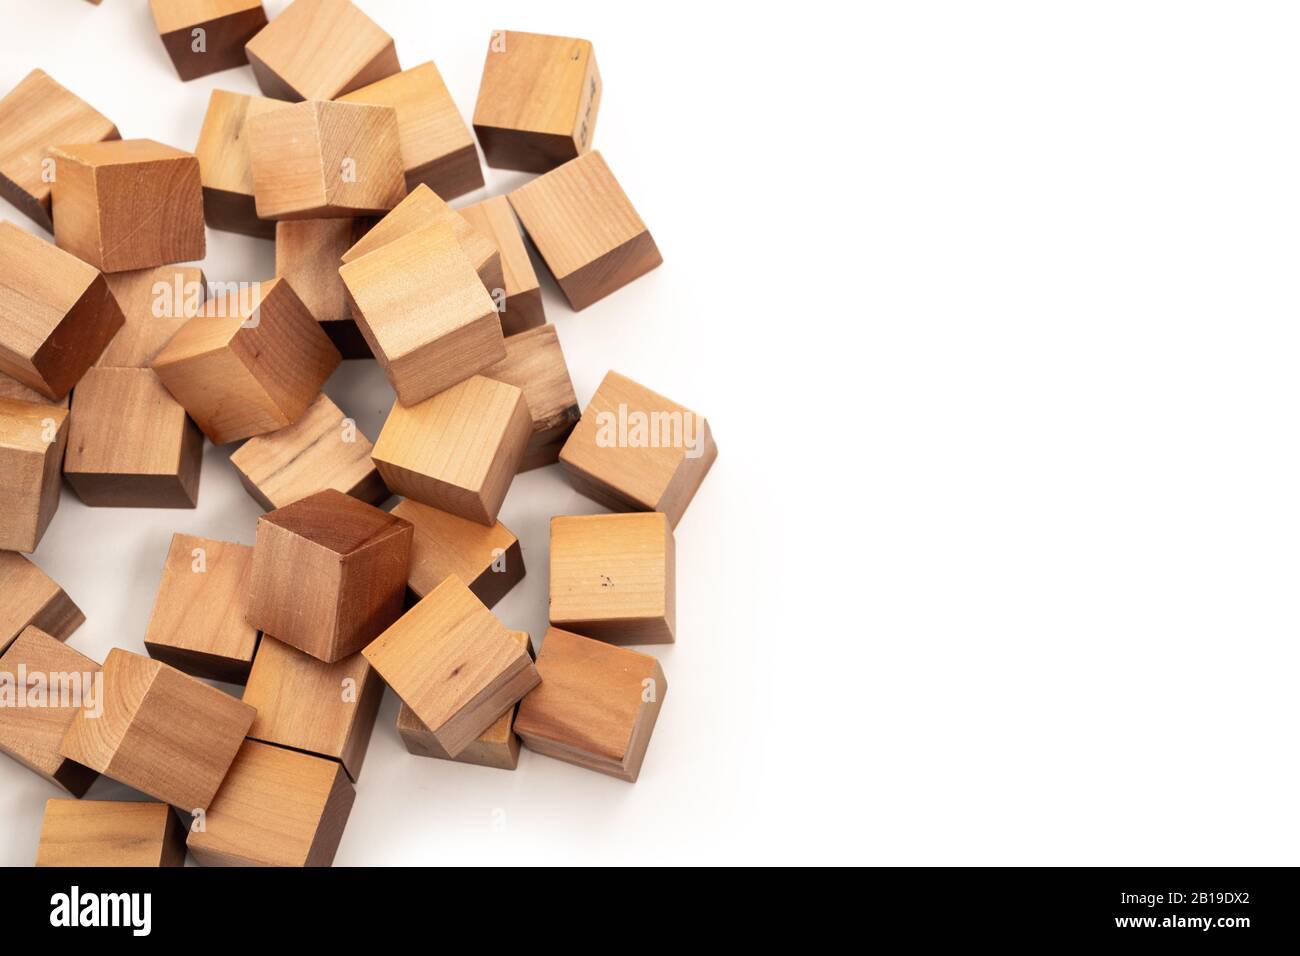 A heap of wooden cubes in kindergarten. Wooden cubes scattered on white background isolated Stock Photo